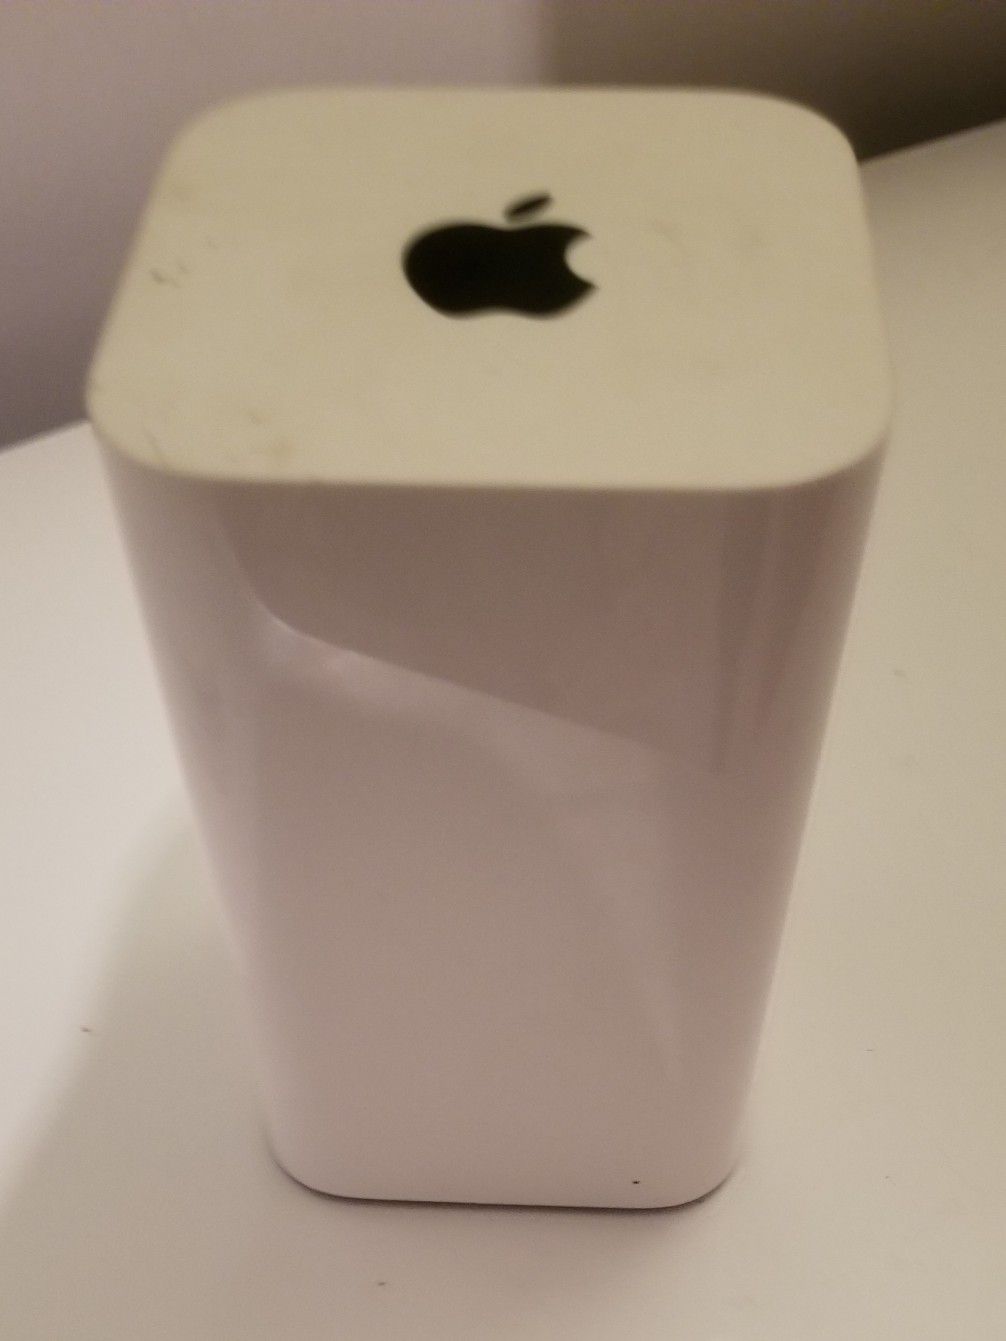 Apple Airport extreme and express.